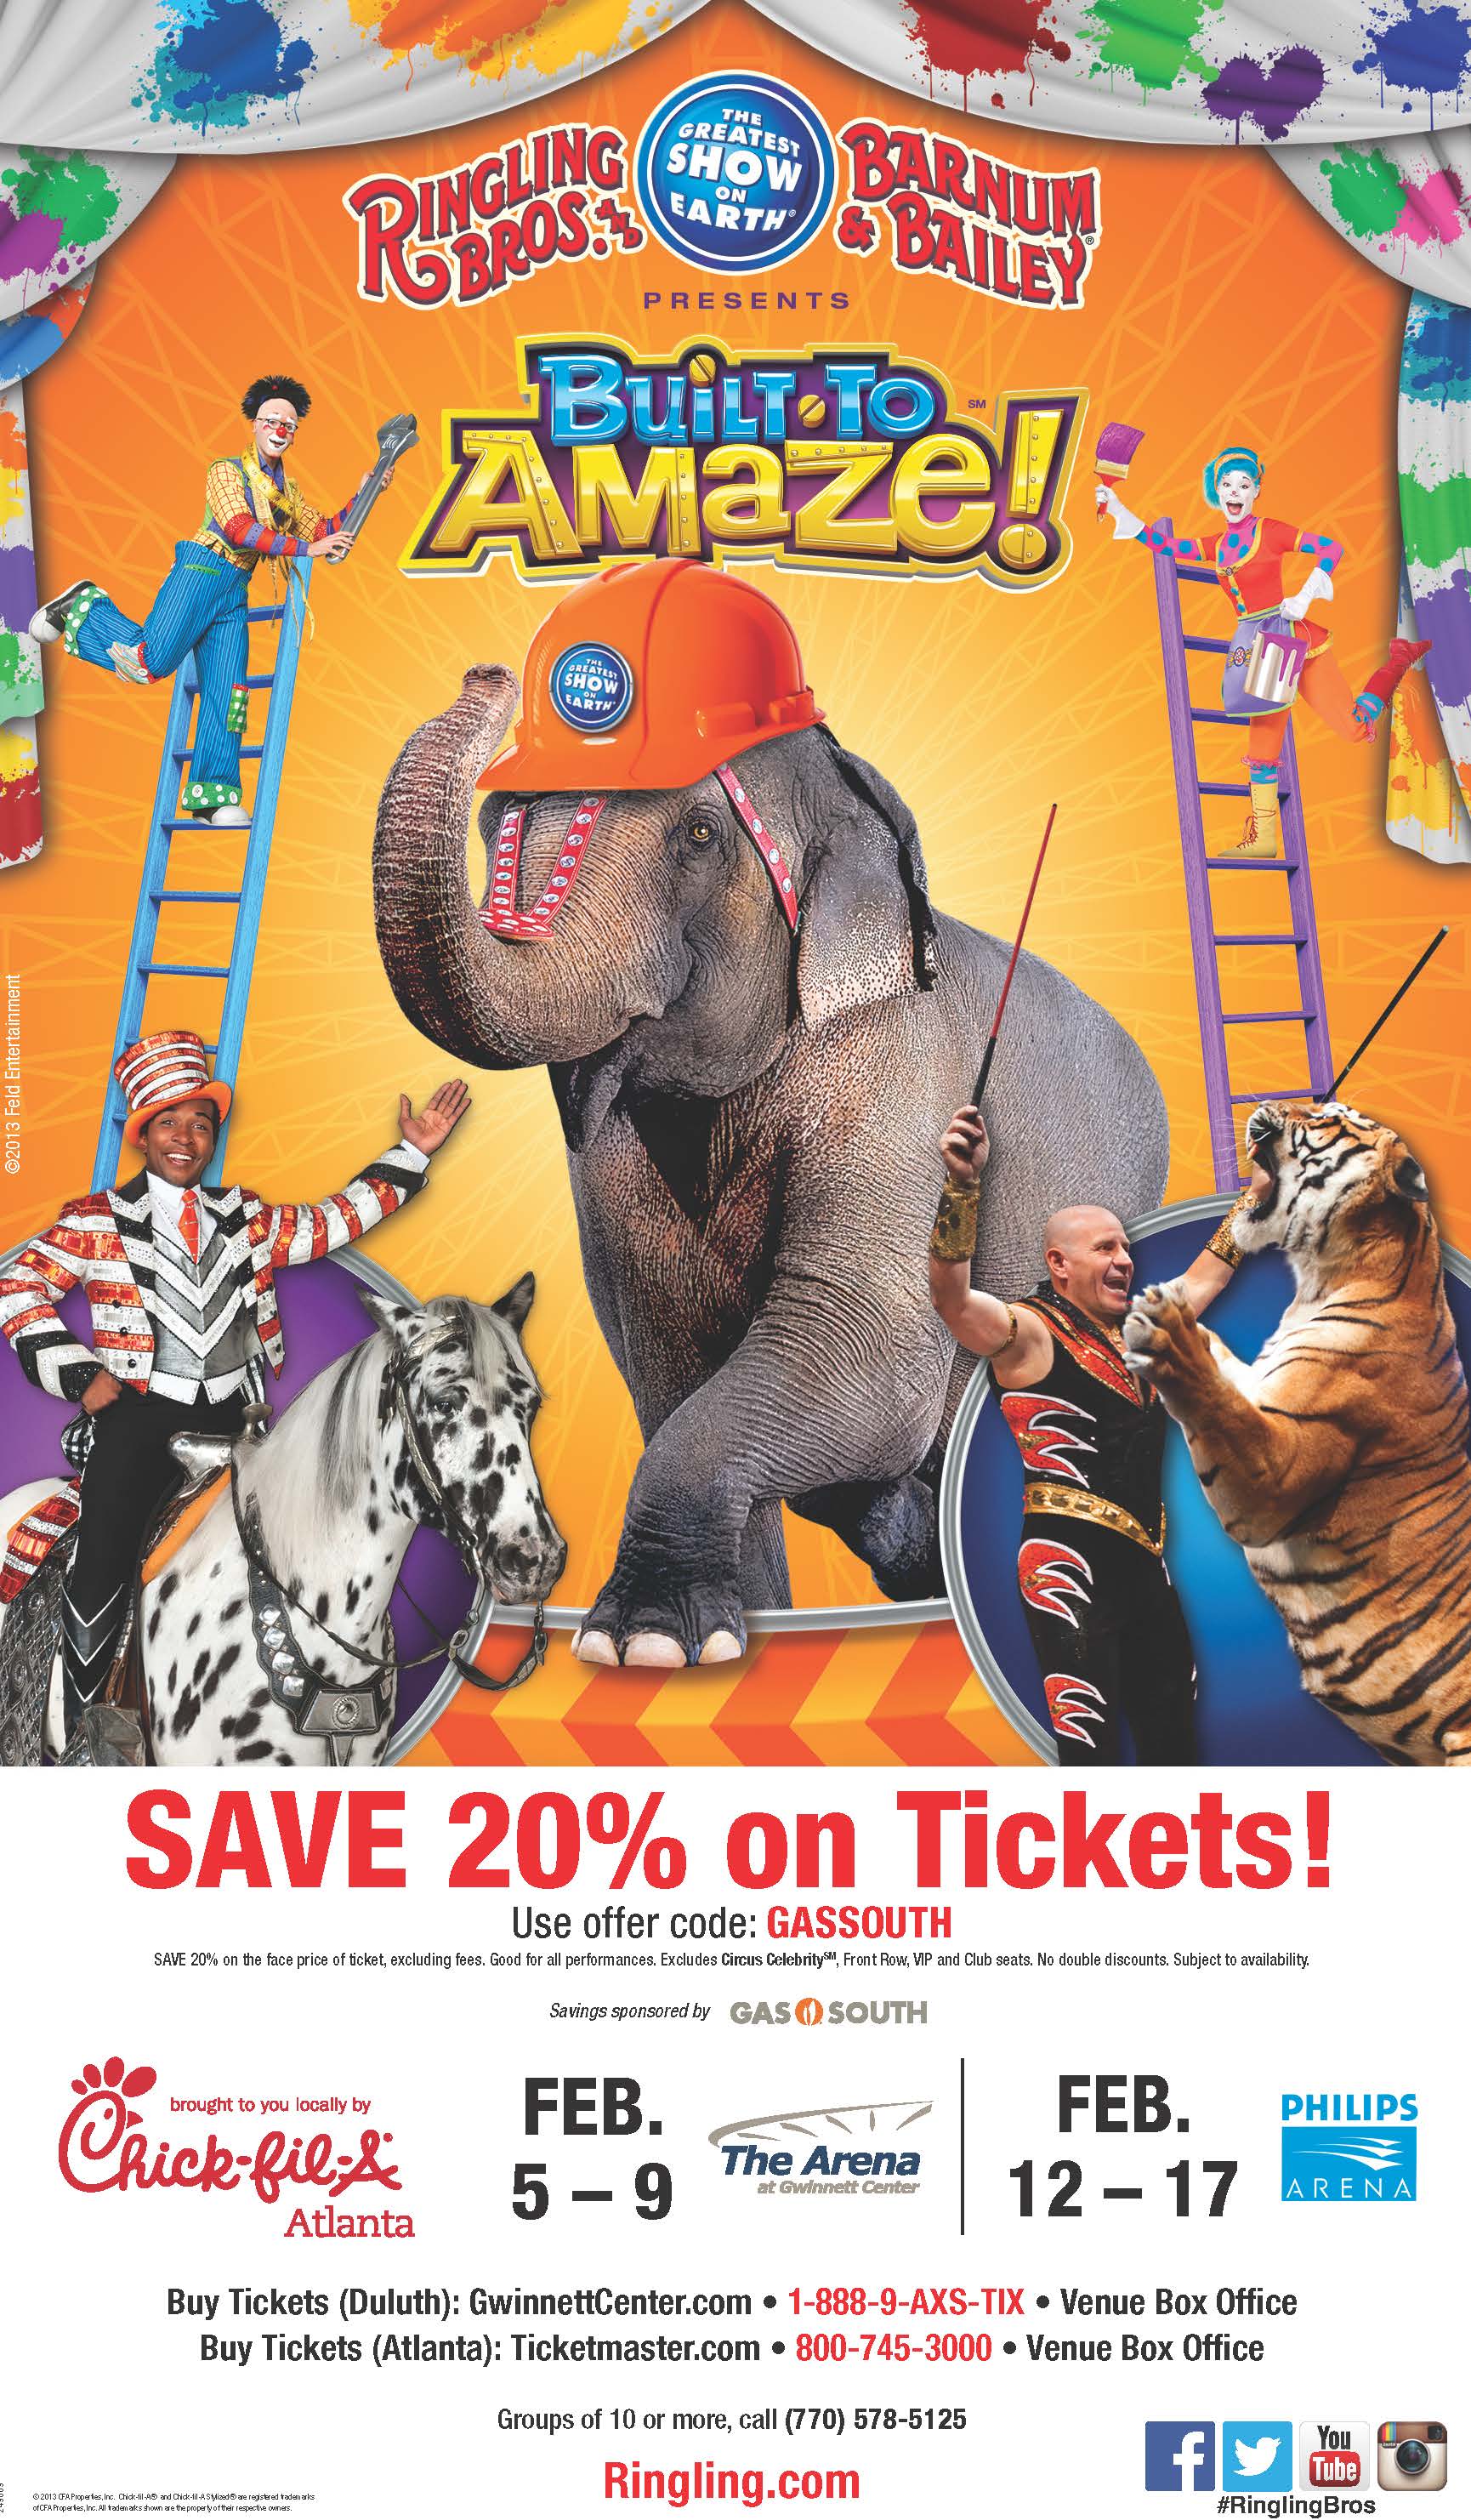 Ringling Bros. and Barnum & Bailey presents Built to Amaze!